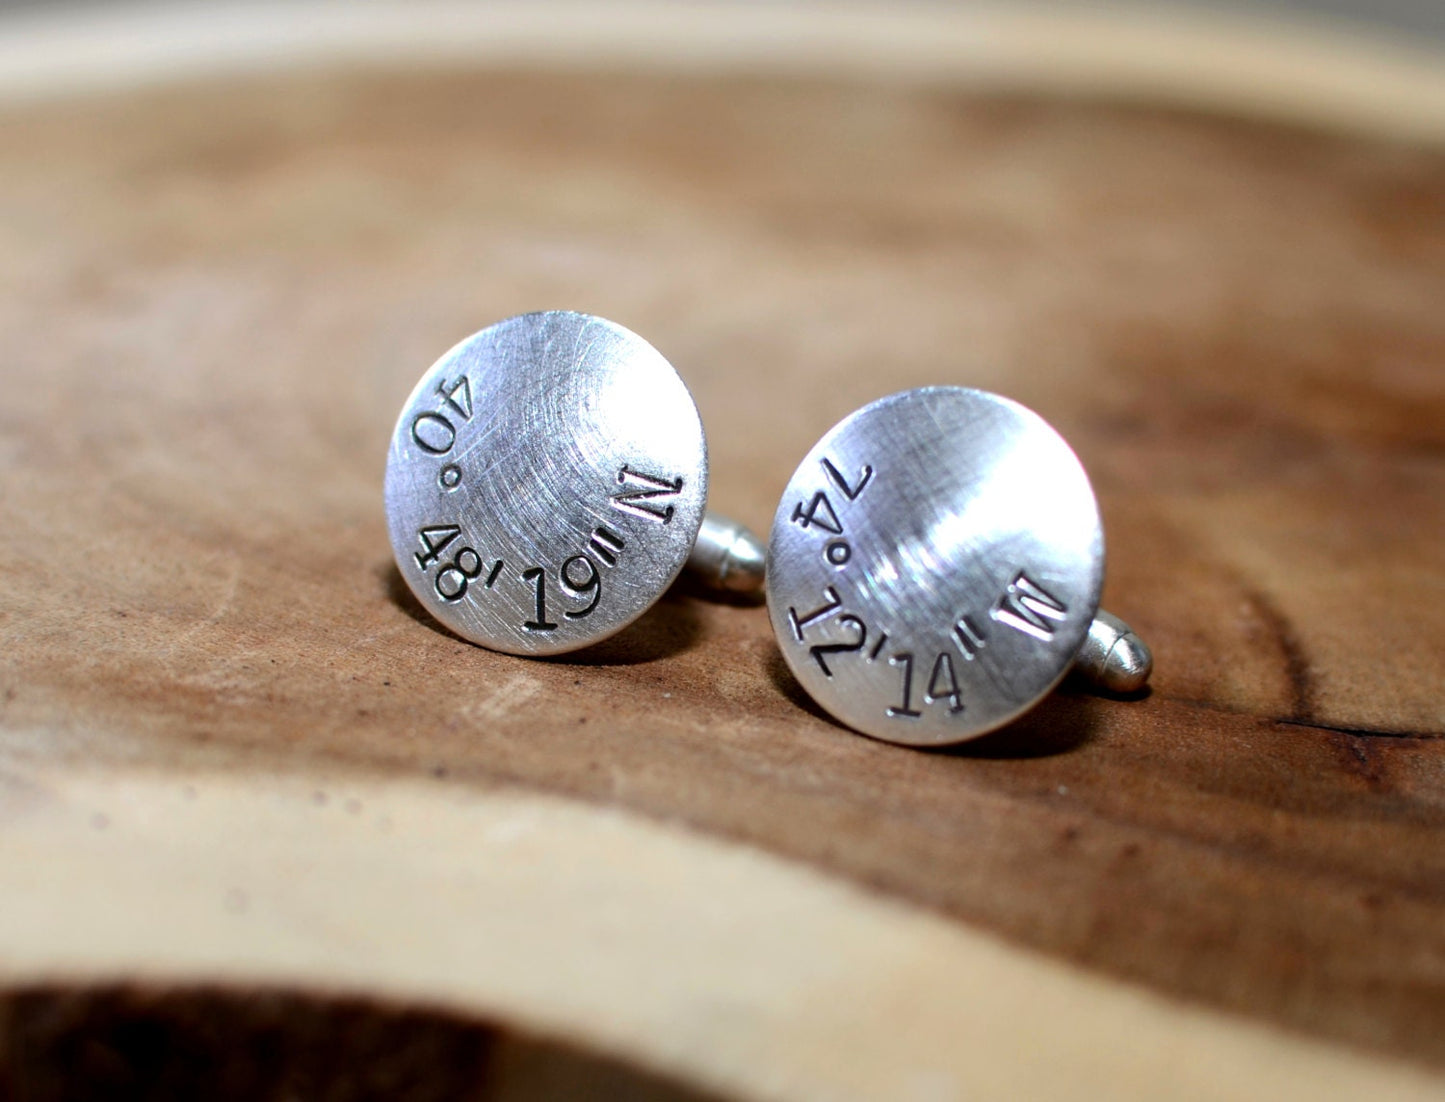 Sterling silver cuff links for silver anniversary or 25th anniversary with your special location - gps coordinates